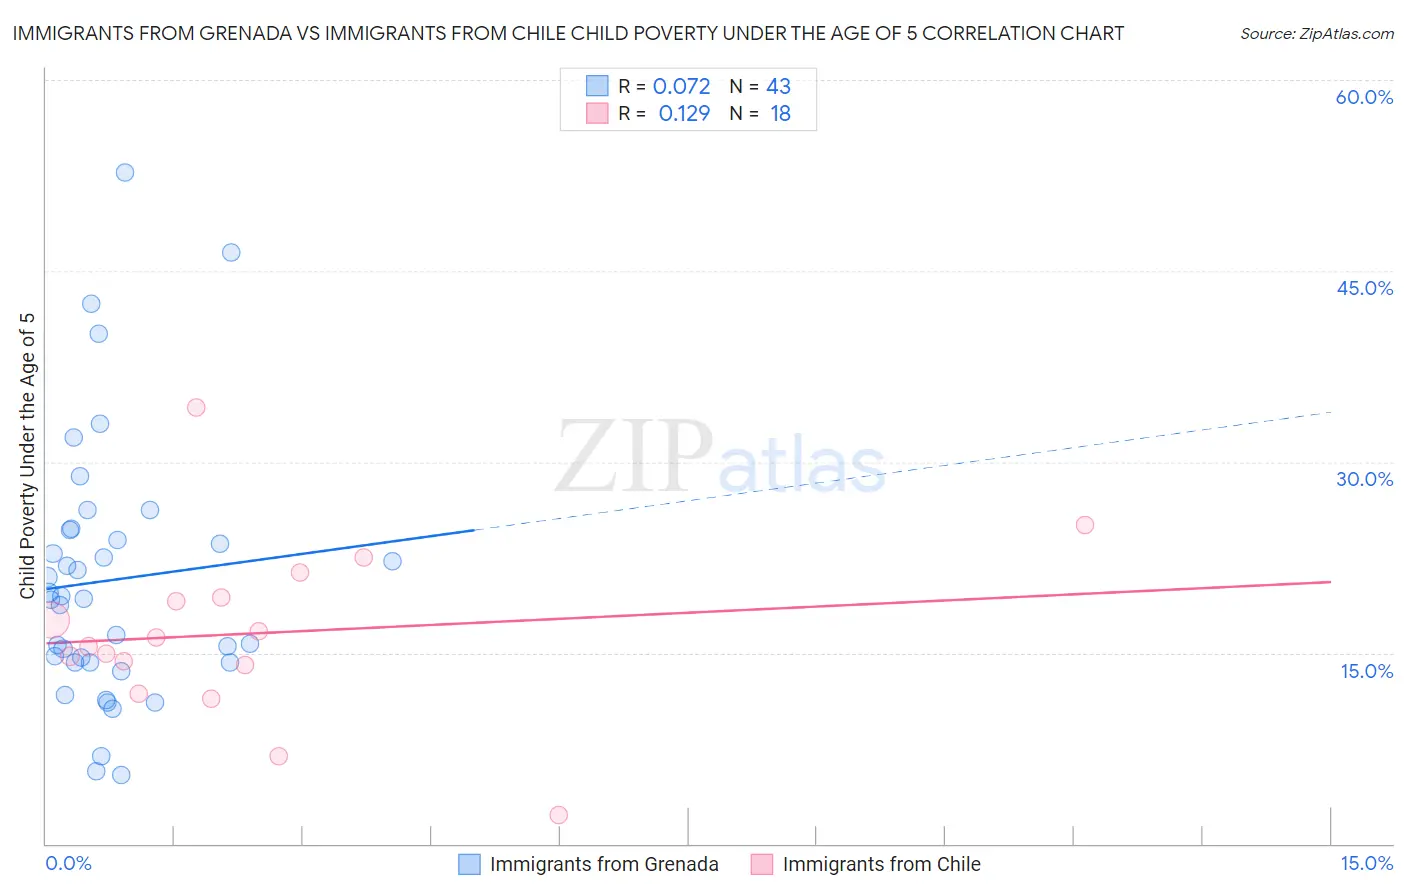 Immigrants from Grenada vs Immigrants from Chile Child Poverty Under the Age of 5